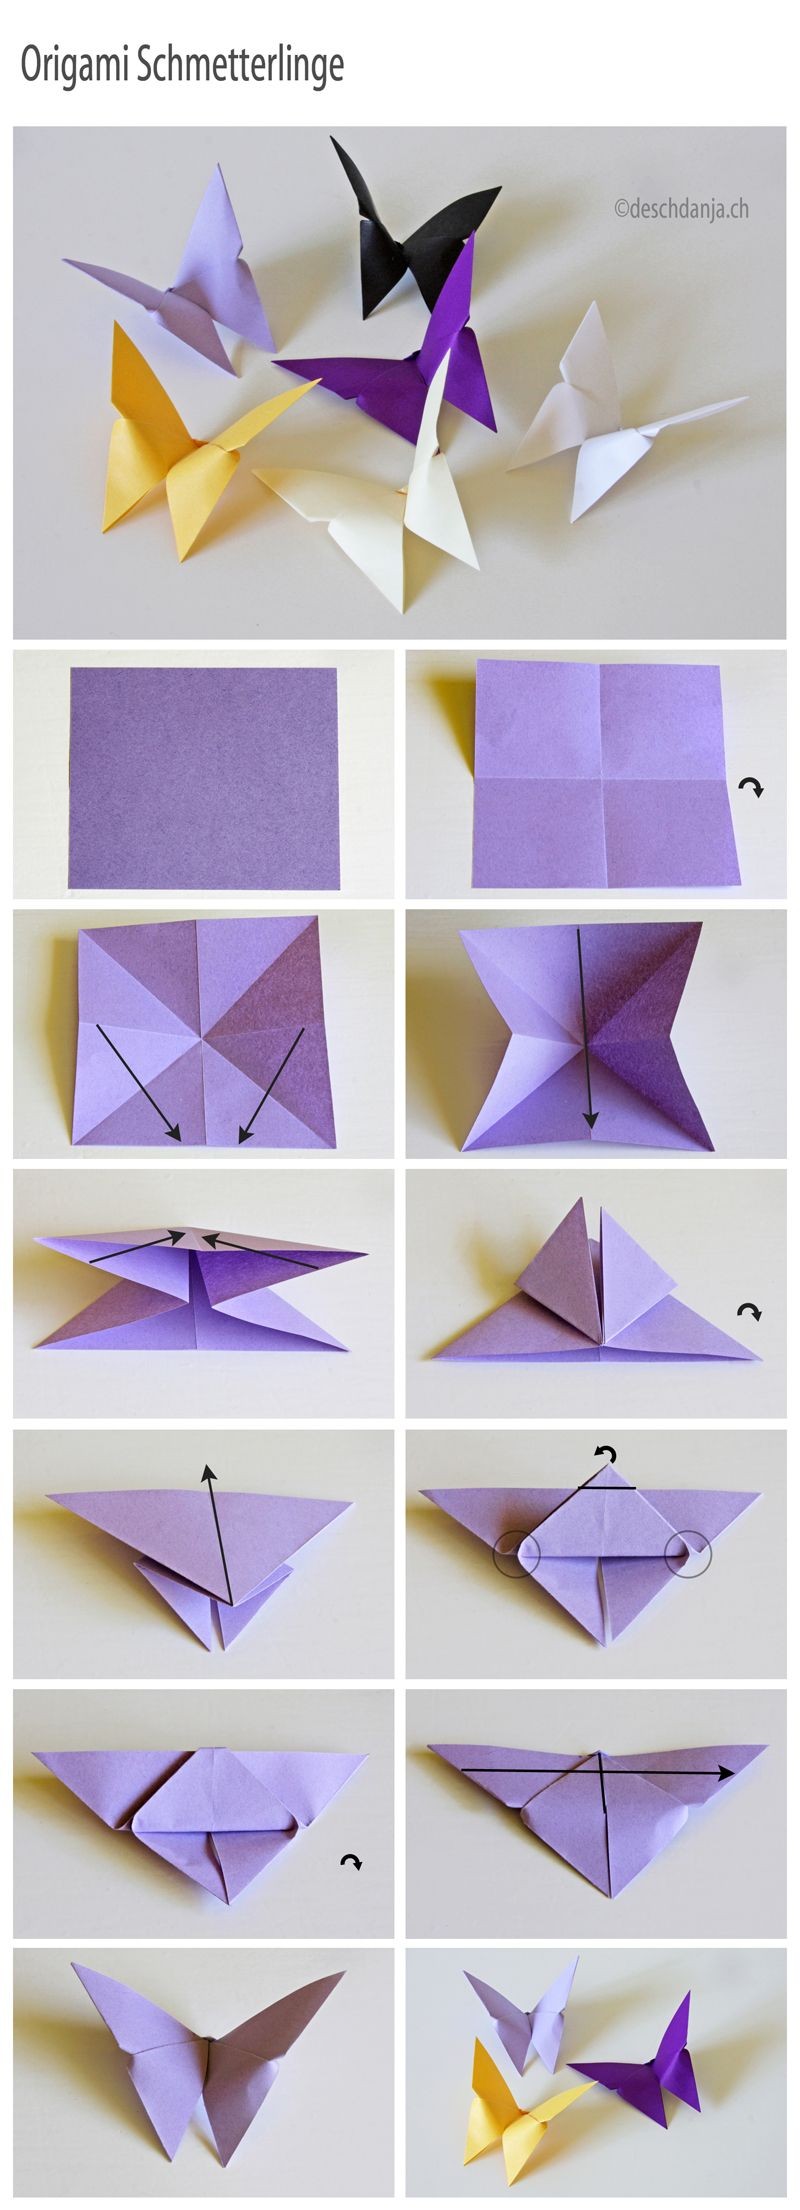 Easy Papercraft Easy Paper Craft Projects You Can Make with Kids